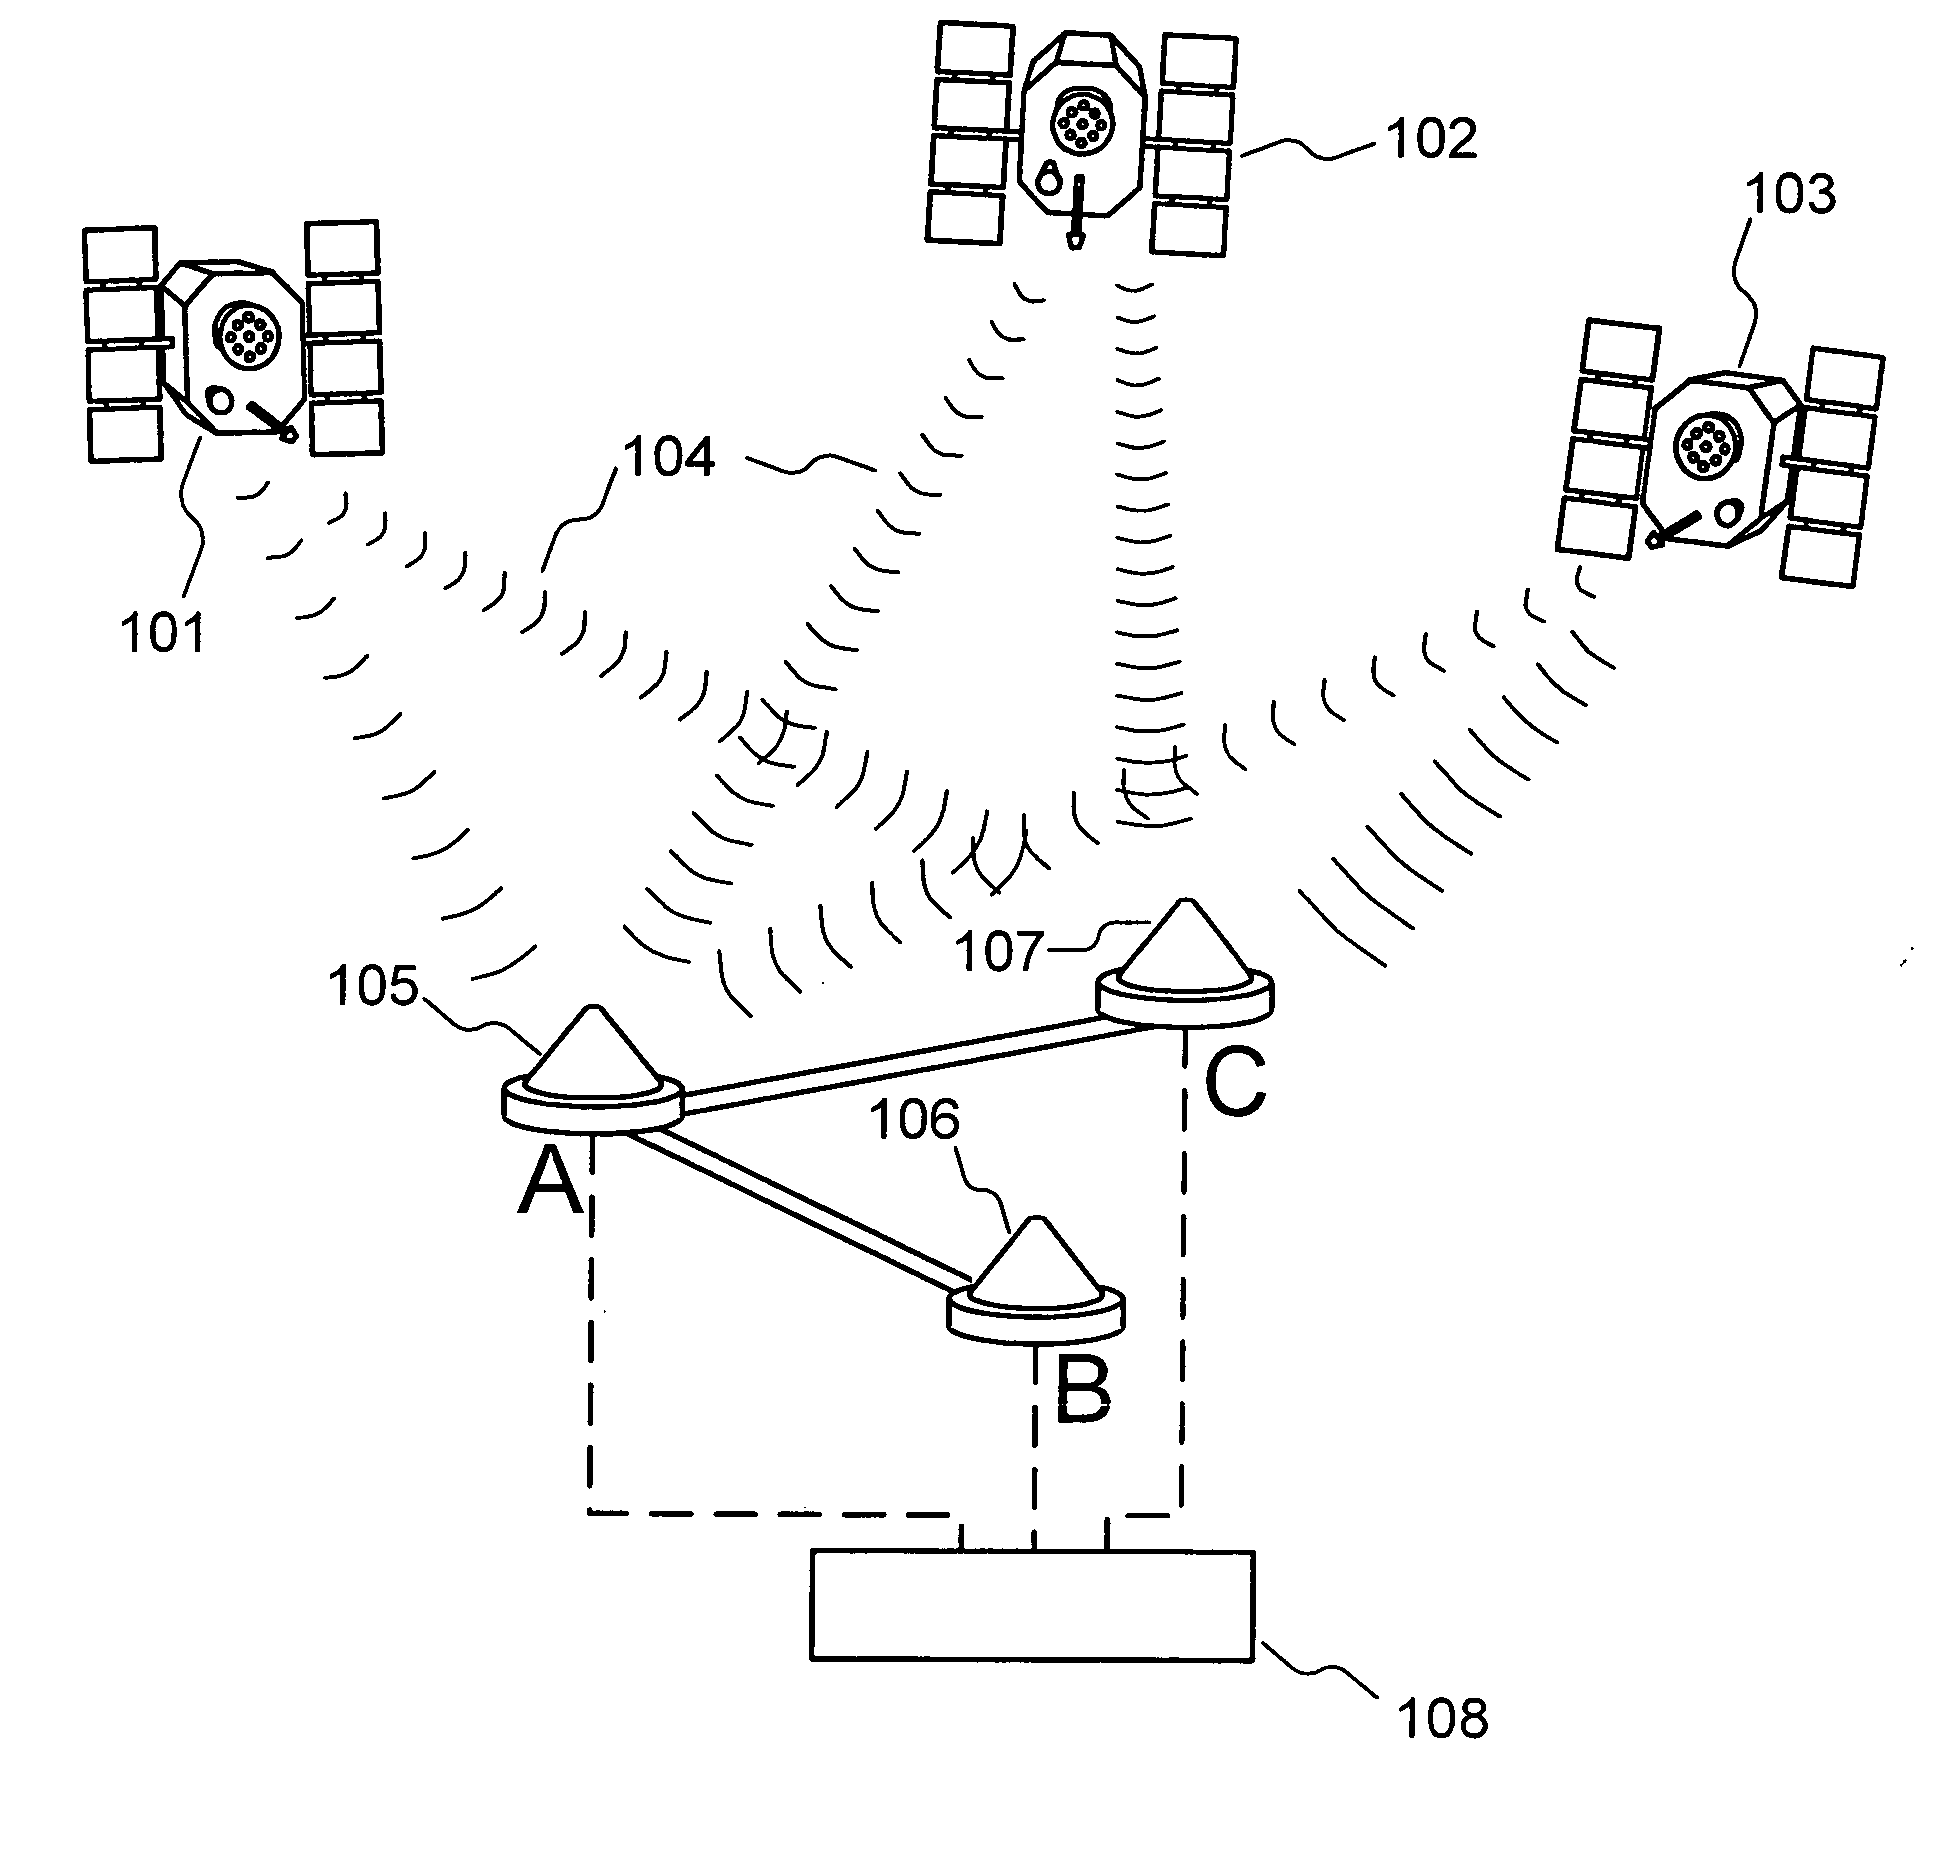 Carrier track loop for GNSS Derived attitude